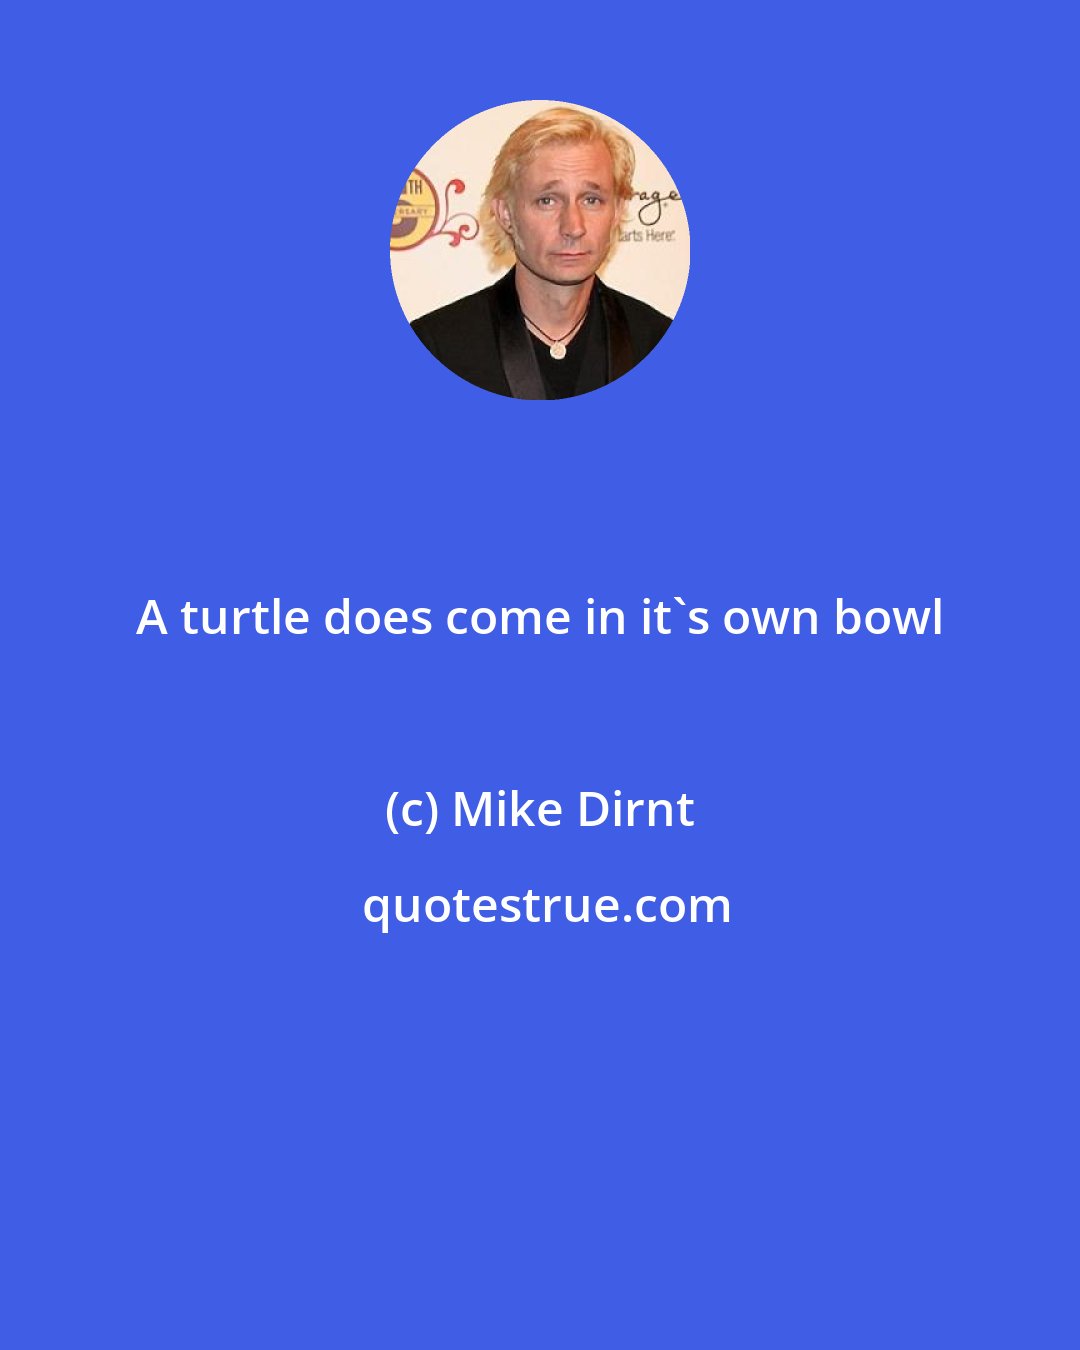 Mike Dirnt: A turtle does come in it's own bowl